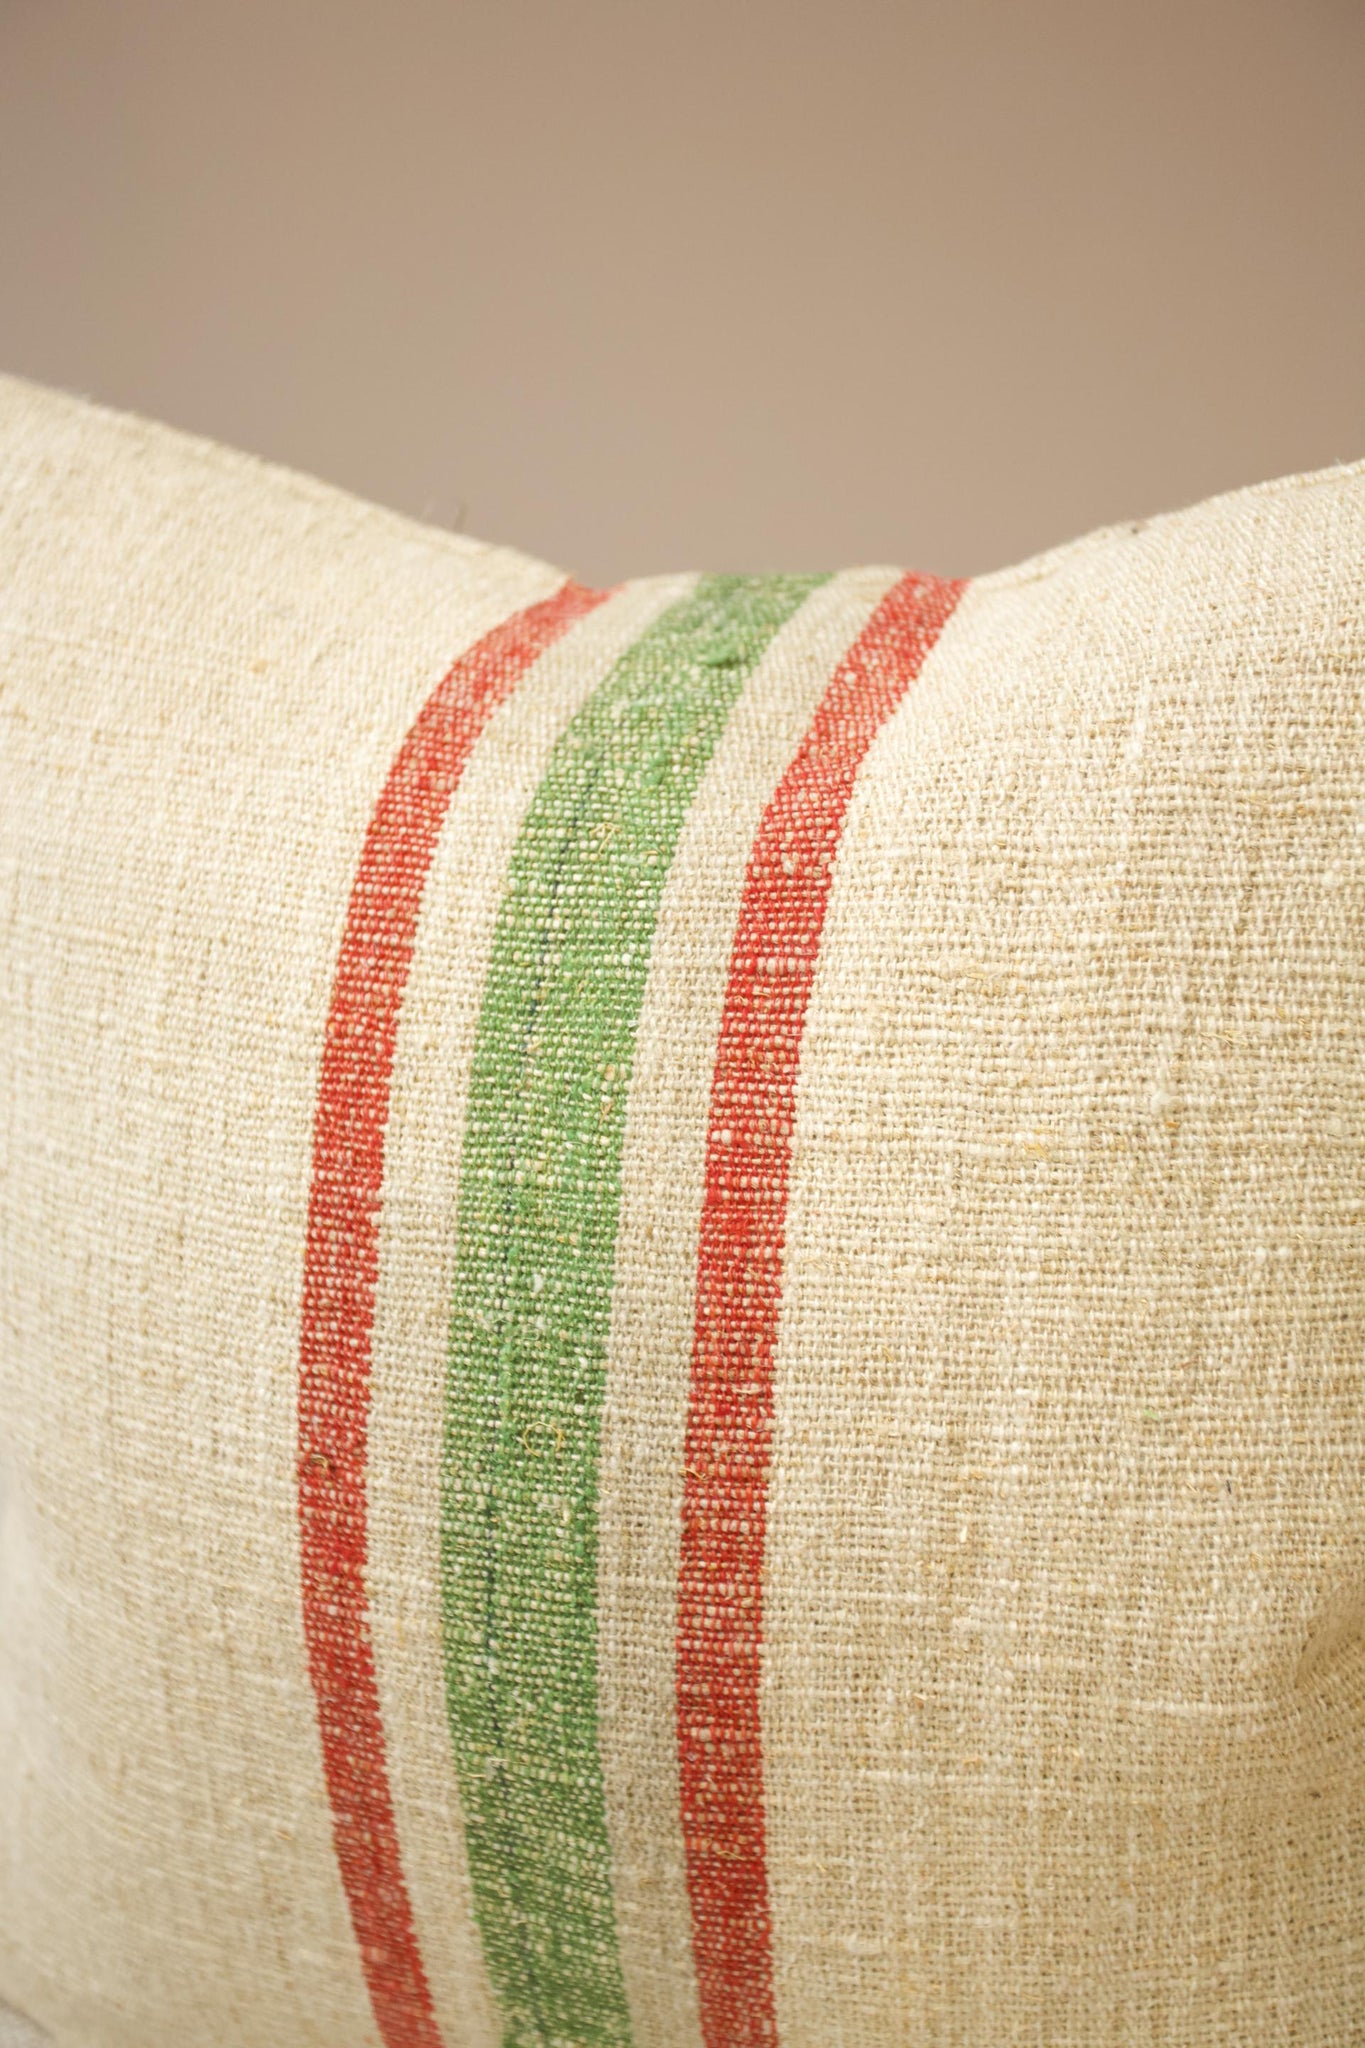 Italian Linen scatter cushion - Green and Red line